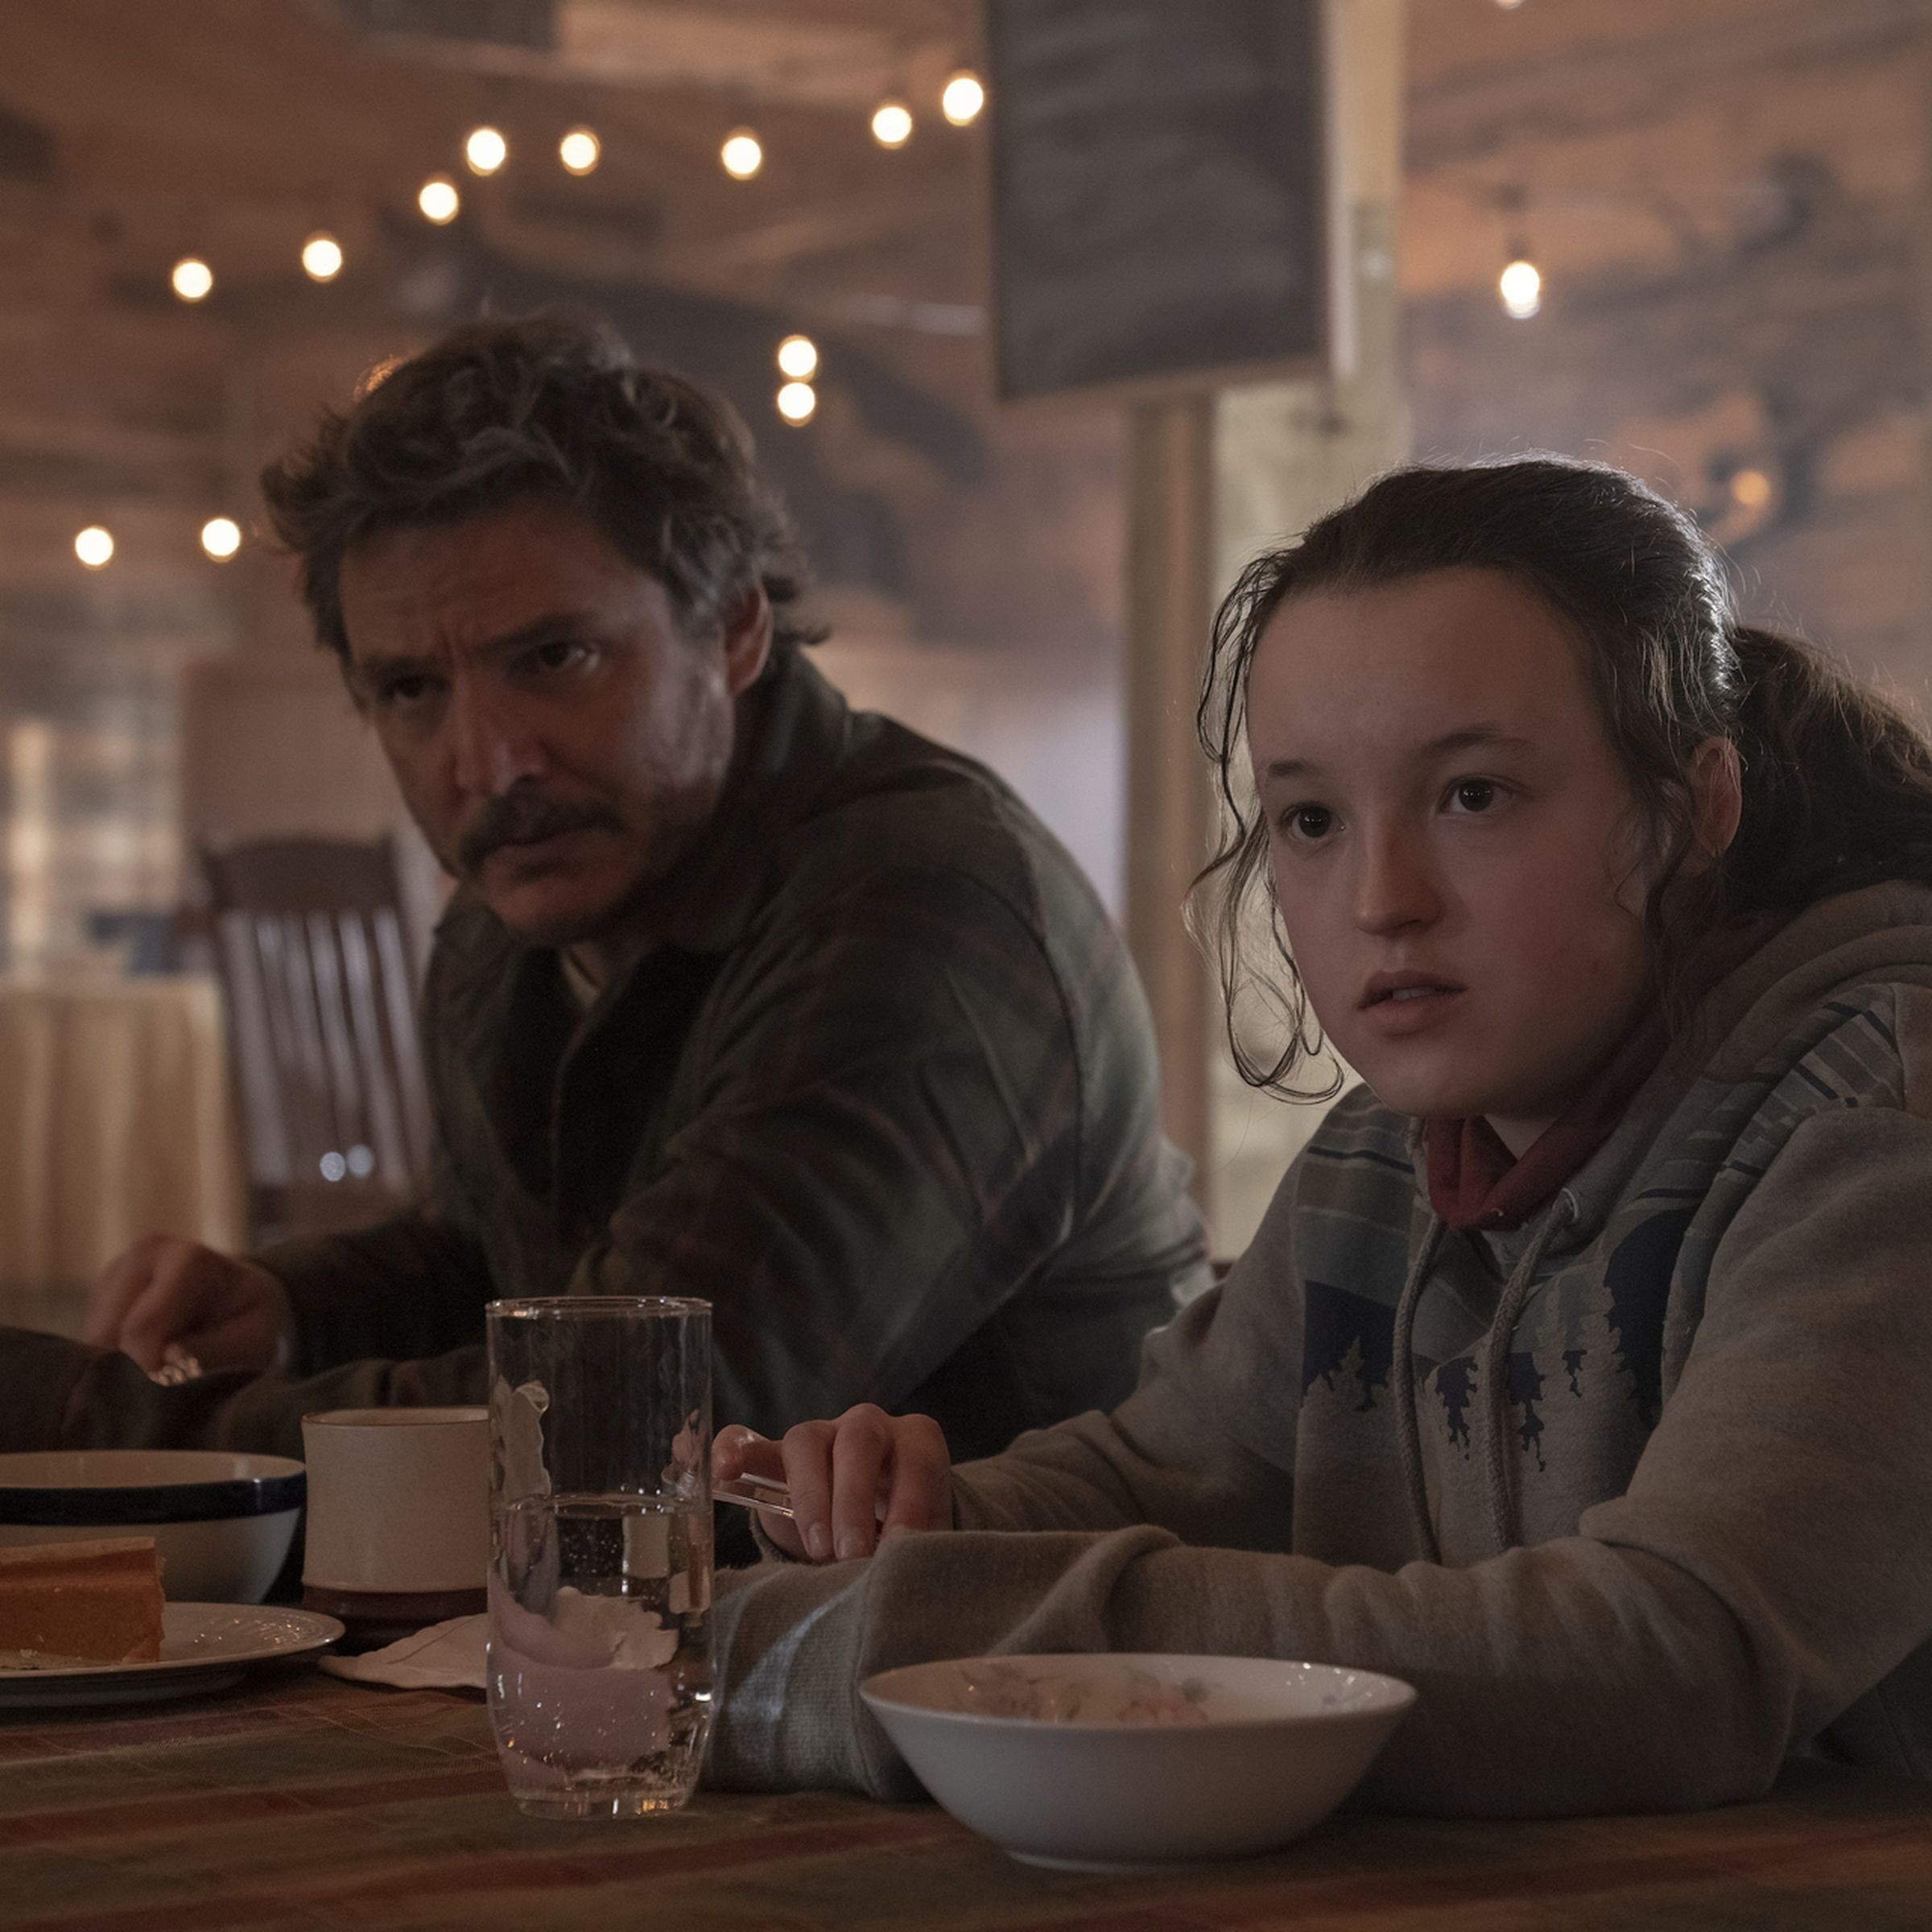 A man wearing a sweater and a girl wearing a hoodie sitting at a table eating breakfast.